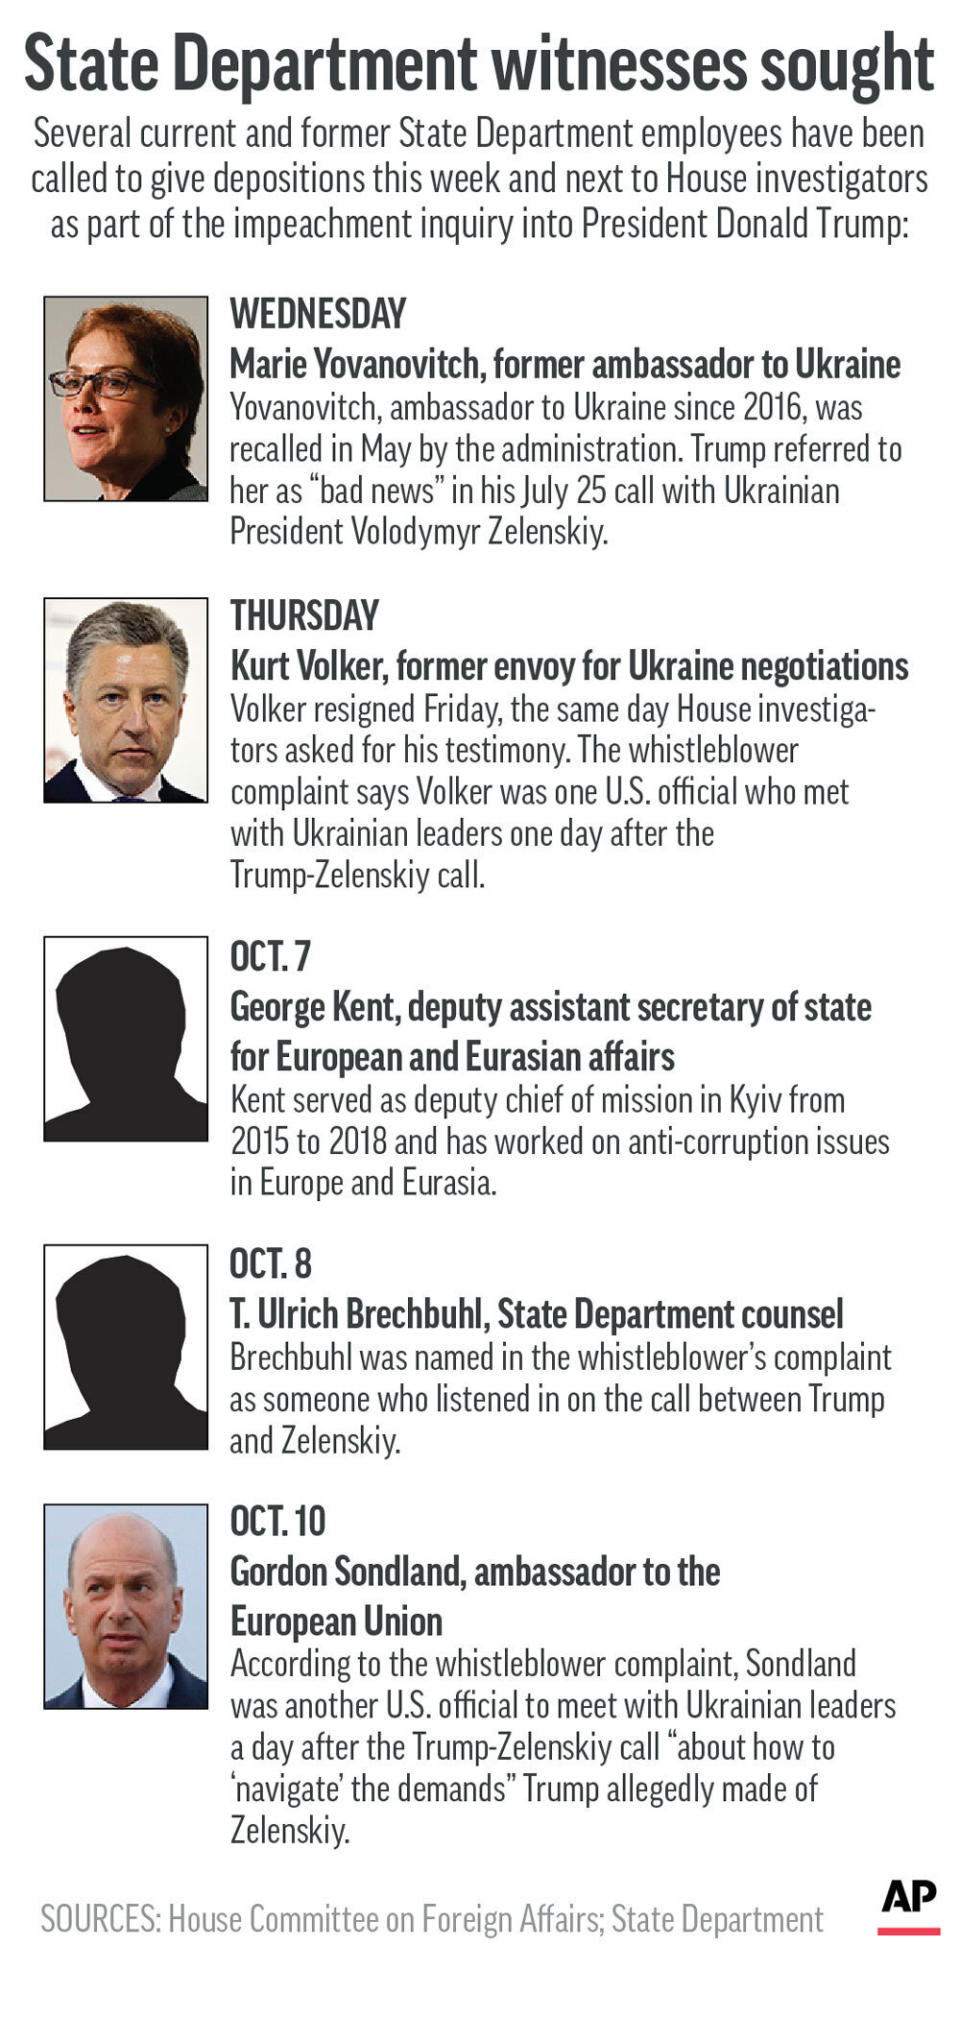 Graphic shows current and former State Department officials called to give depositions in Trump impeachment inquiry;